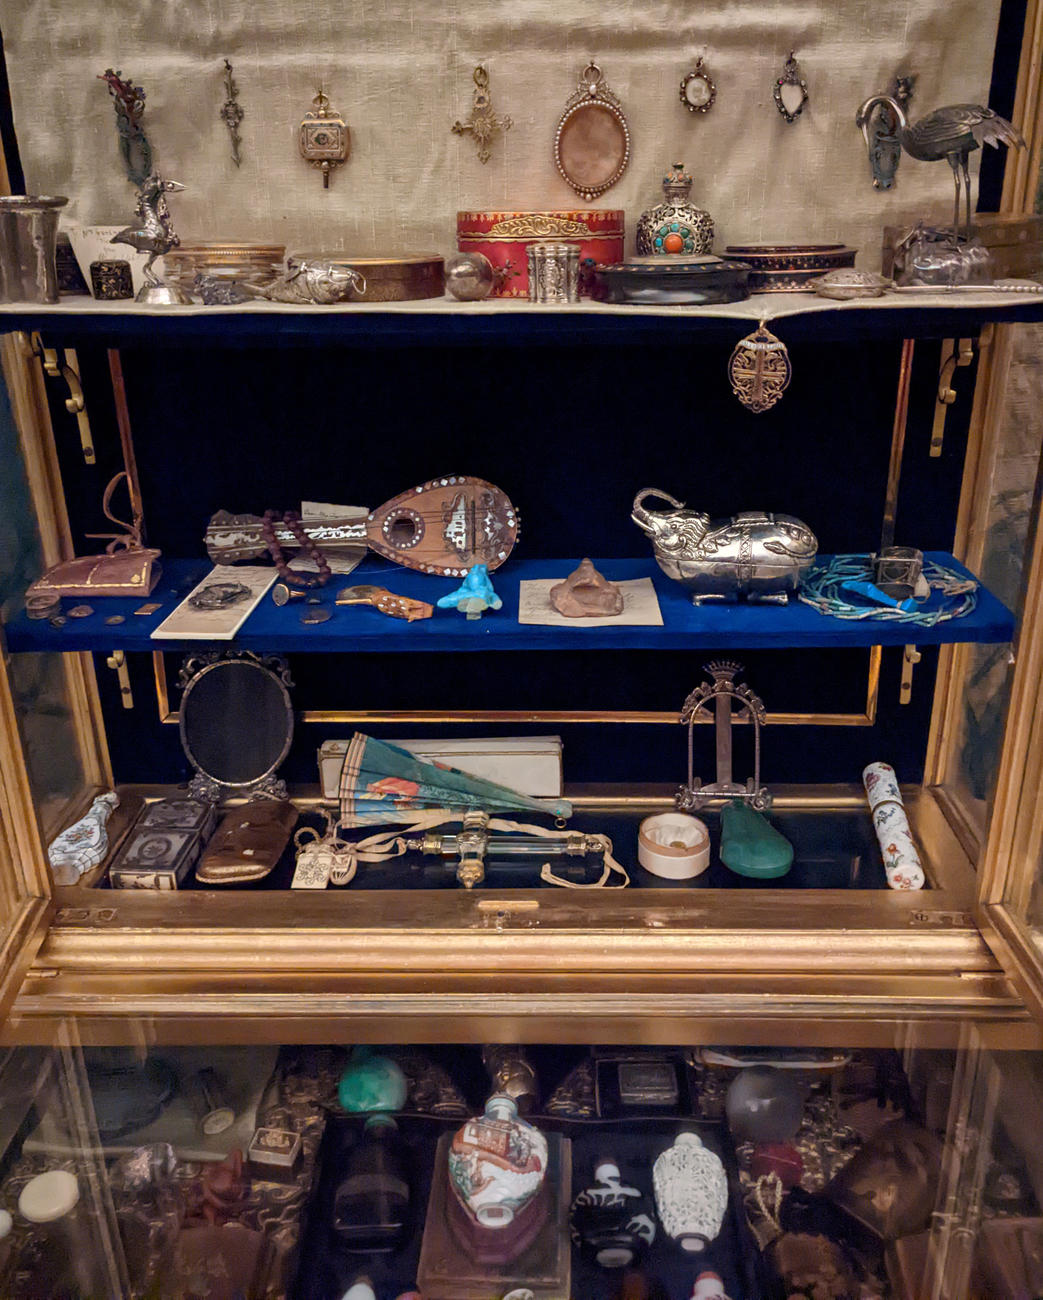 An image of a gilt vitrine from the Gardner Museum showing four levels of small objects displayed in its interior.